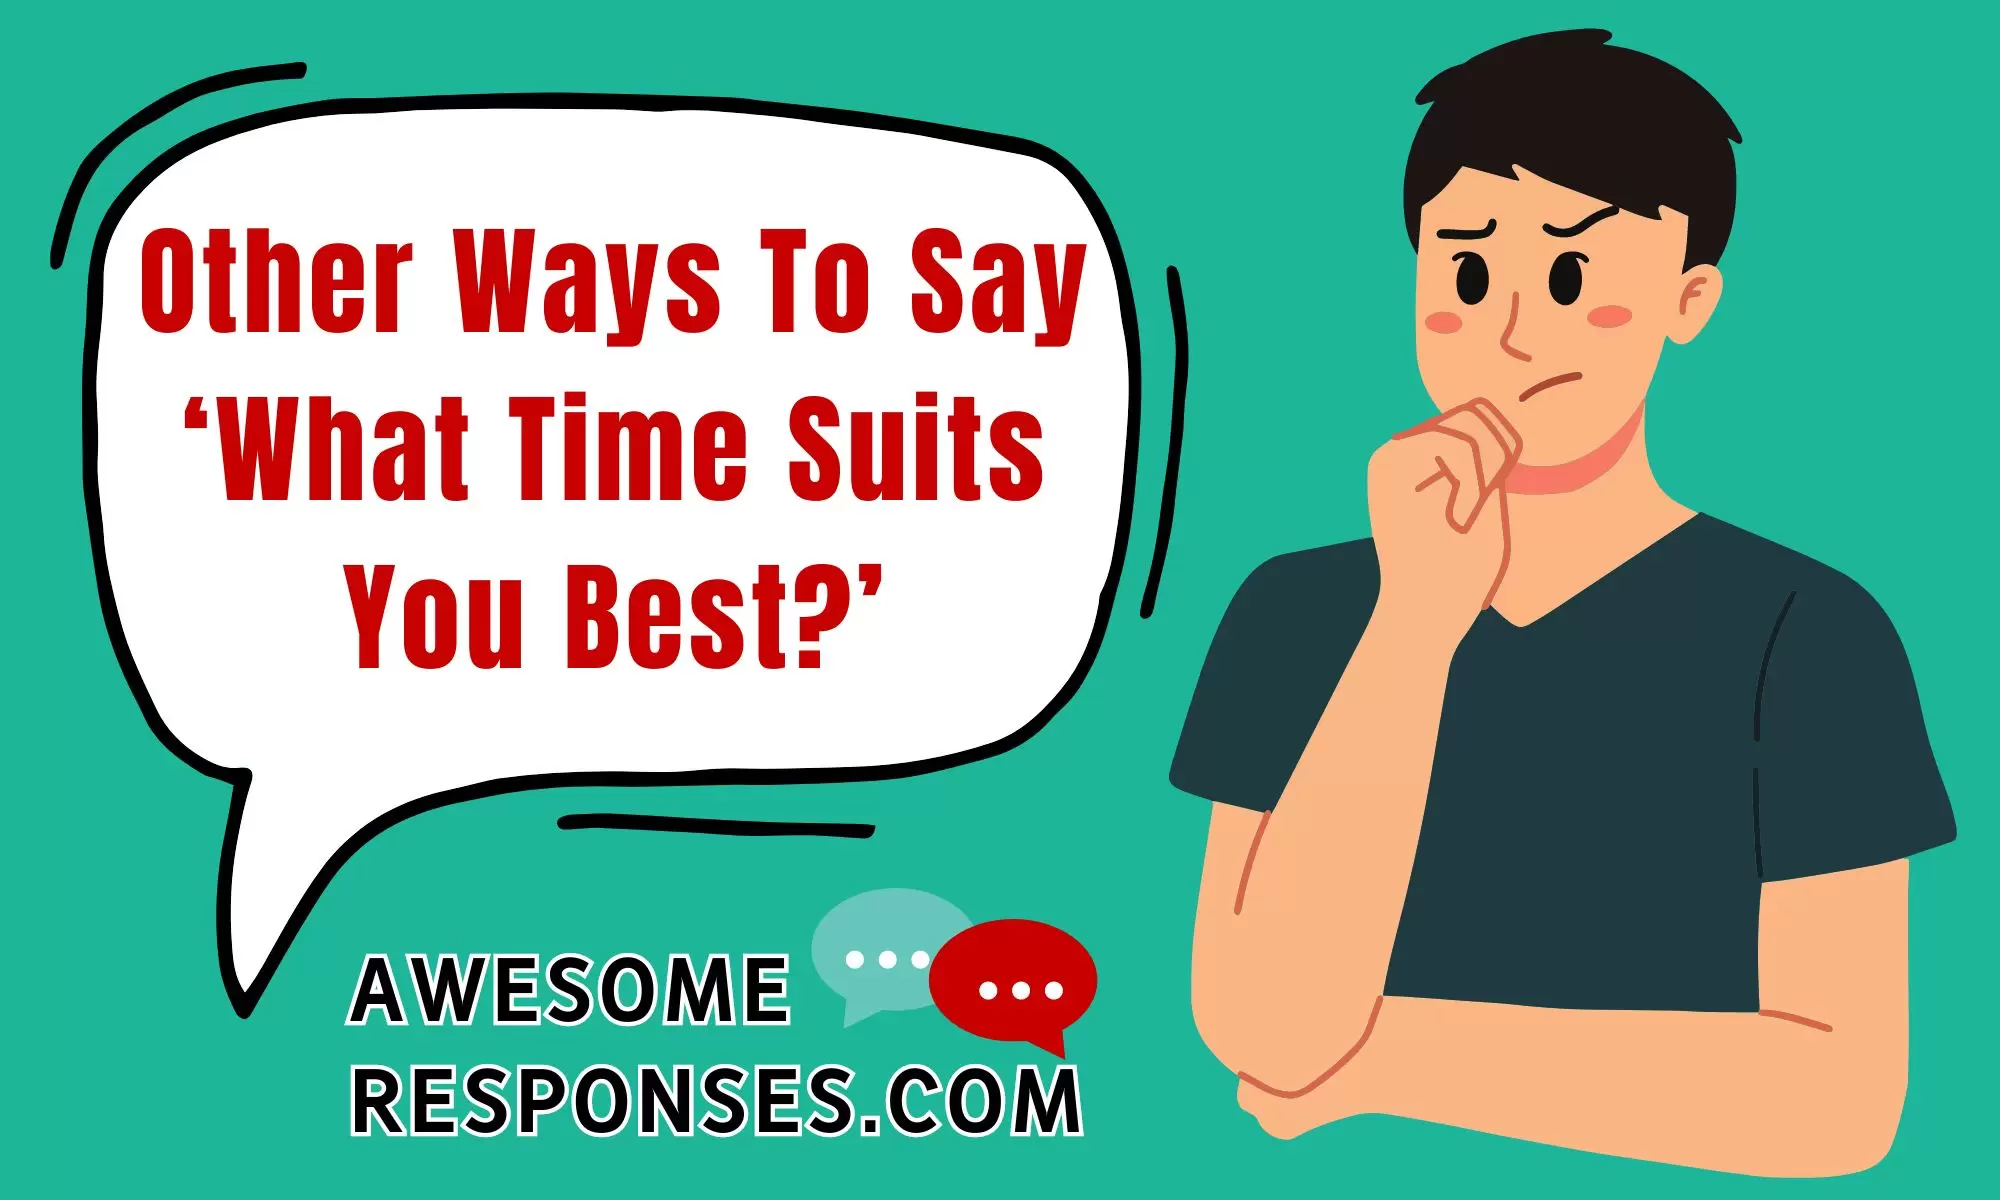 Other Ways To Say ‘What Time Suits You Best?’